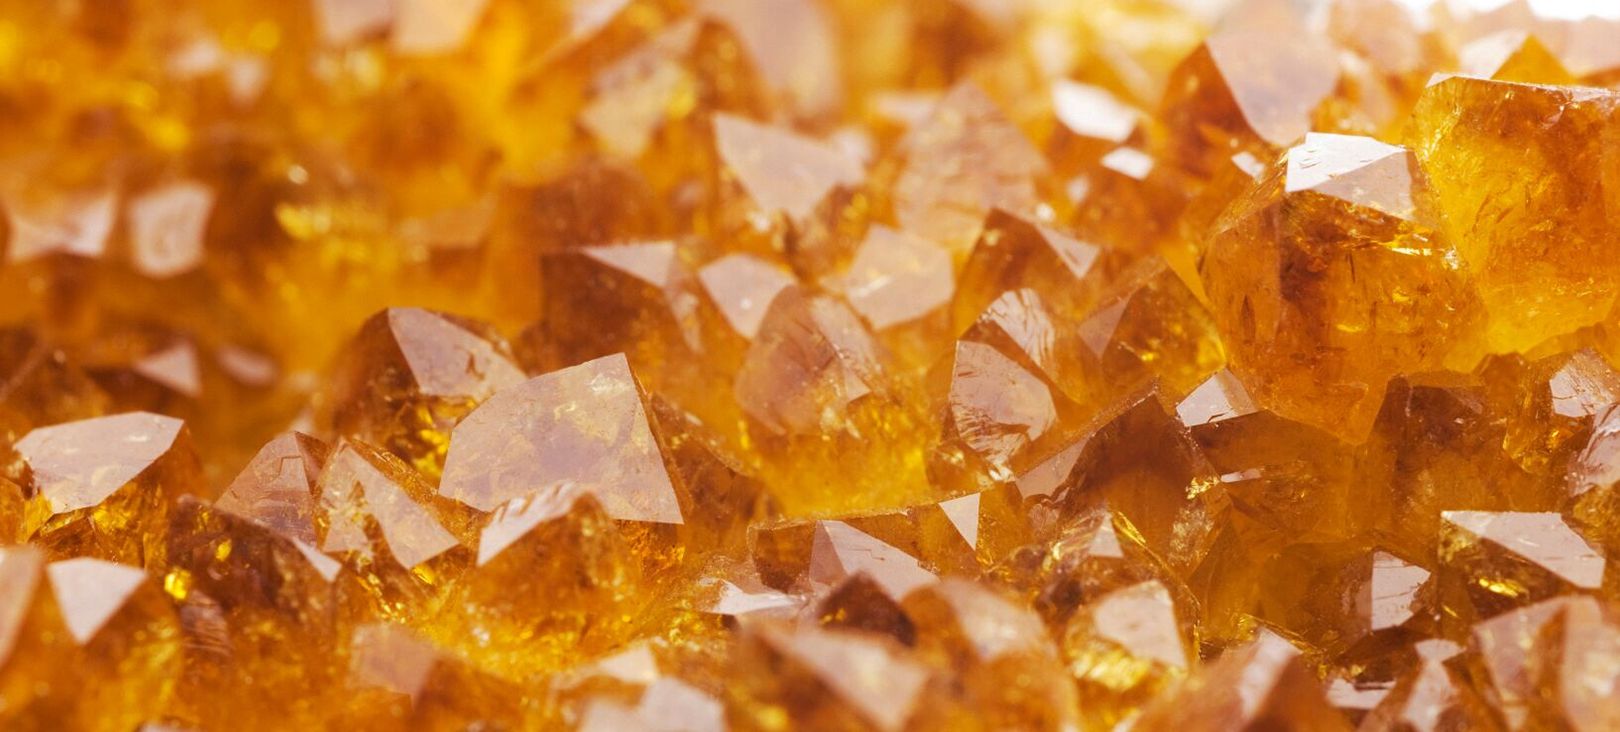 Orange Crystals Stone – Meanings, Properties & Benefits